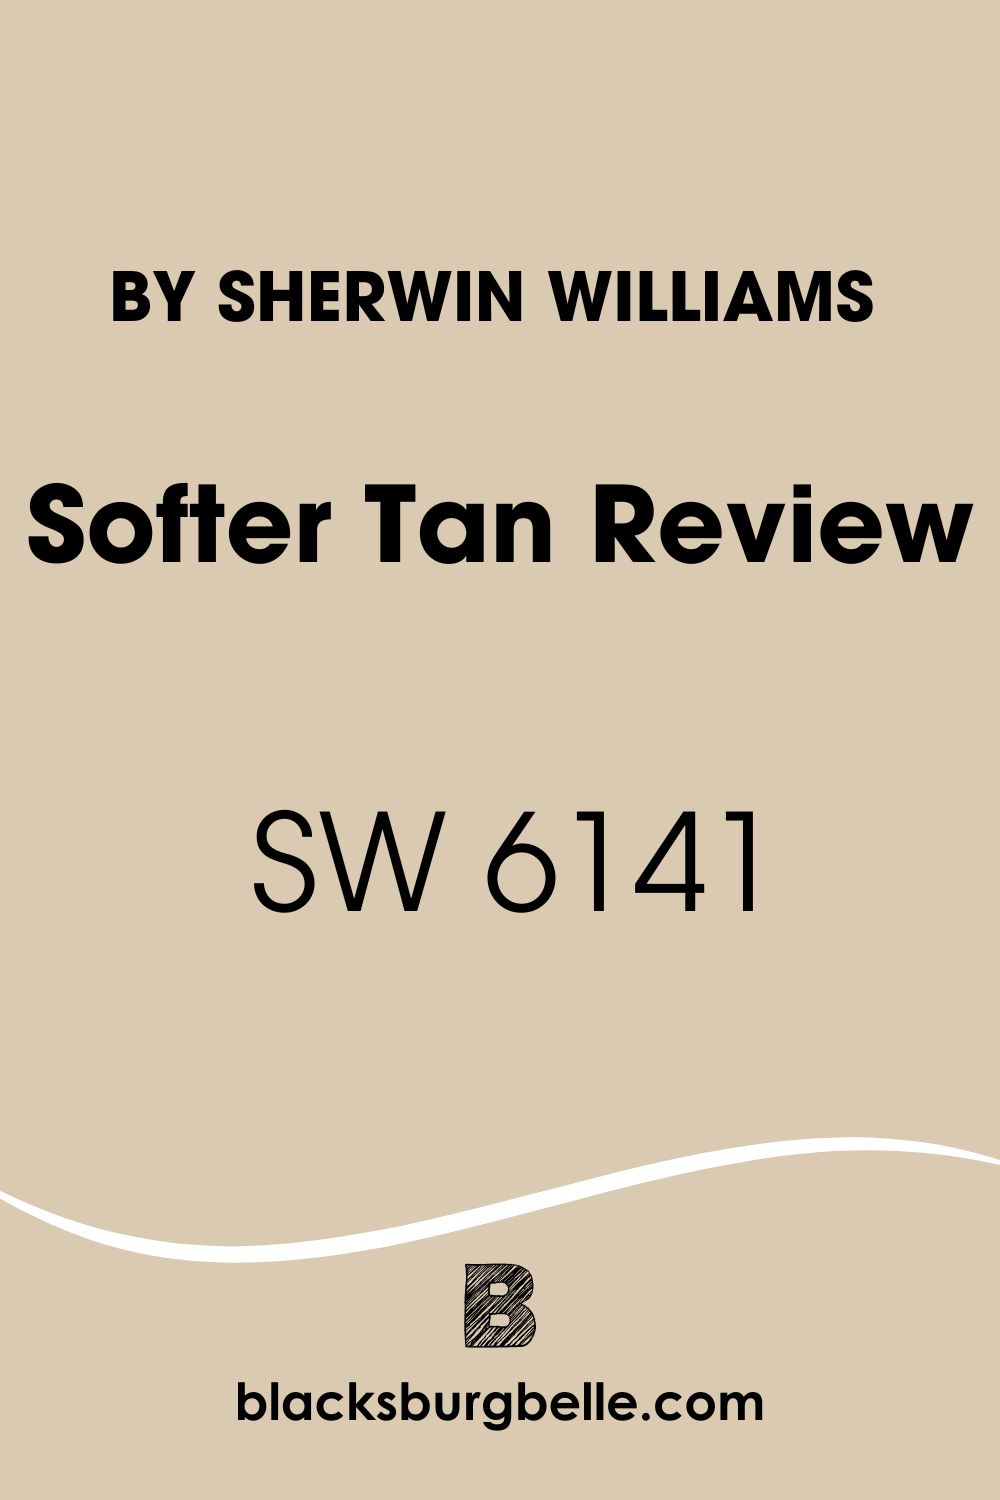 Sherwin Williams Softer Tan Review SW 6141